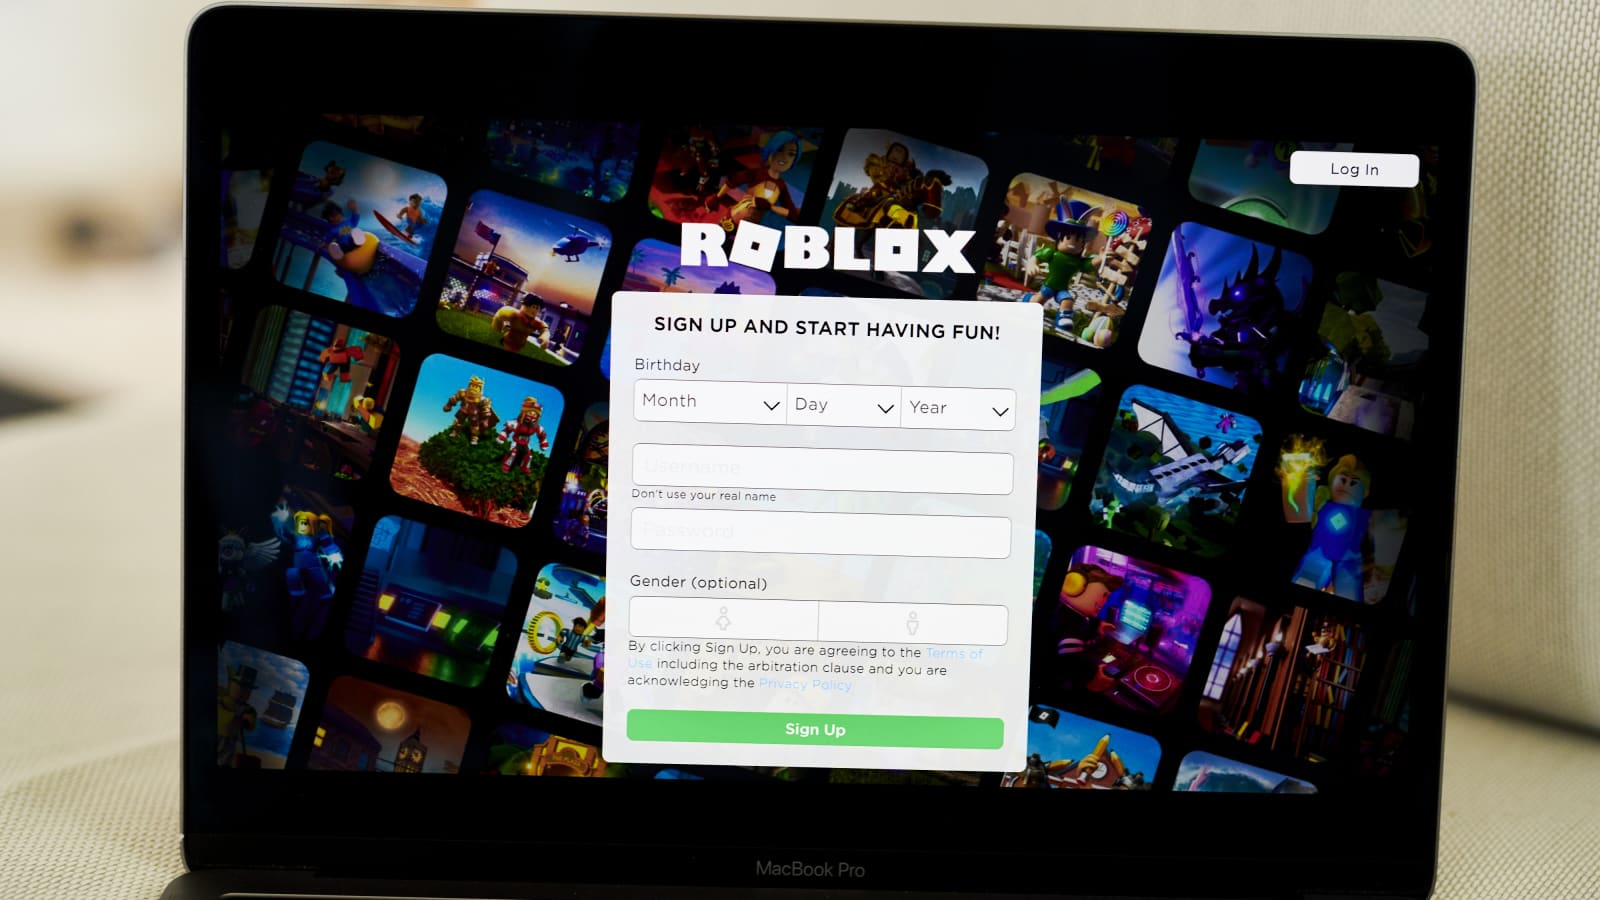 Roblox's in-game browser uses outdated internet technology